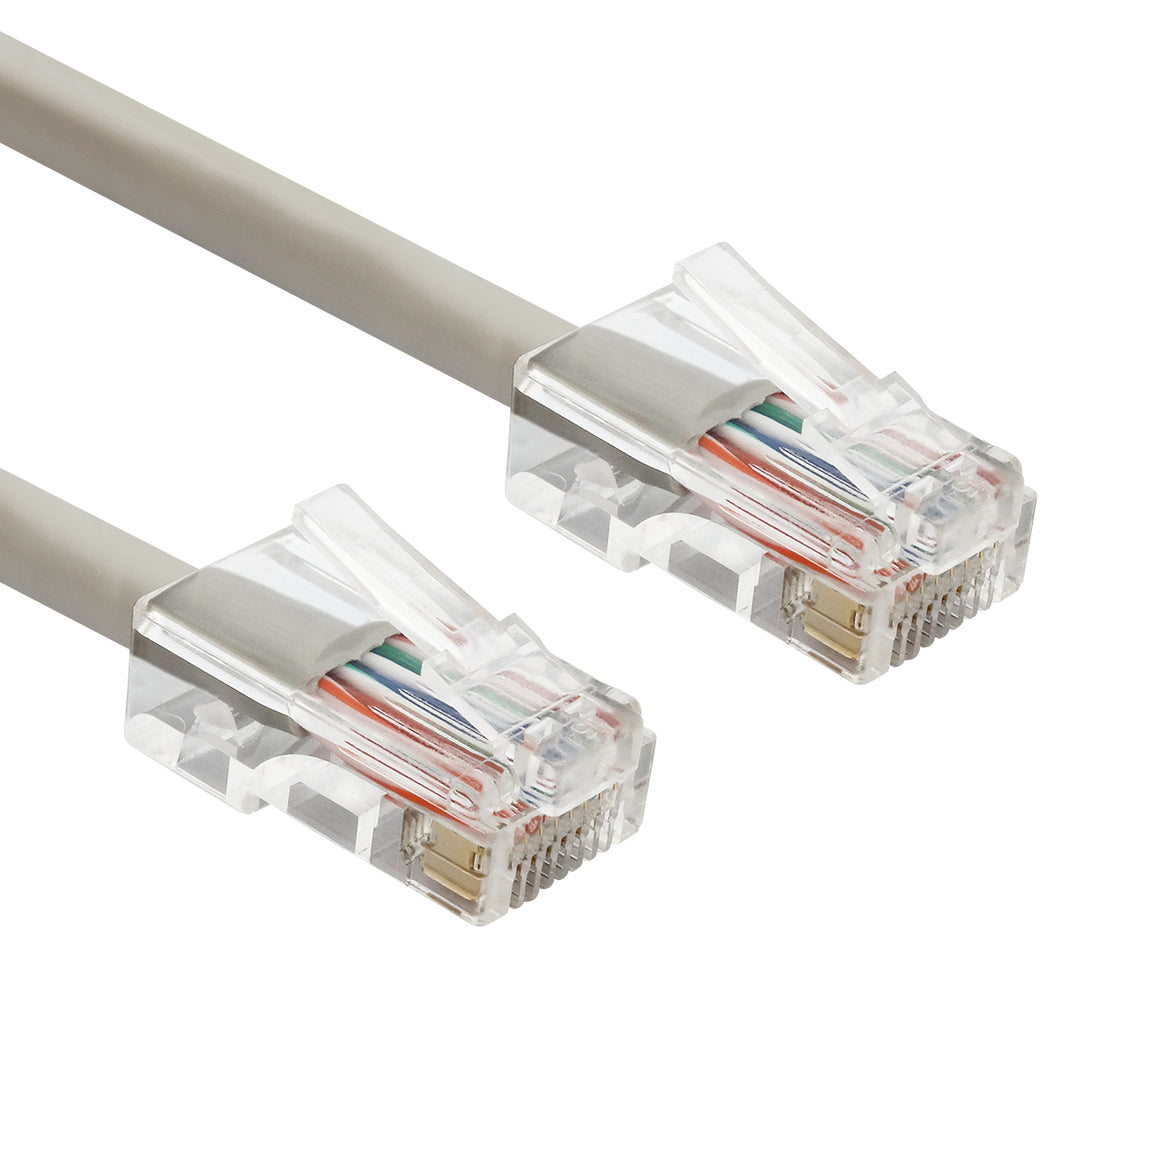 non-booted rj45 cat5e ethernet network patch cable black